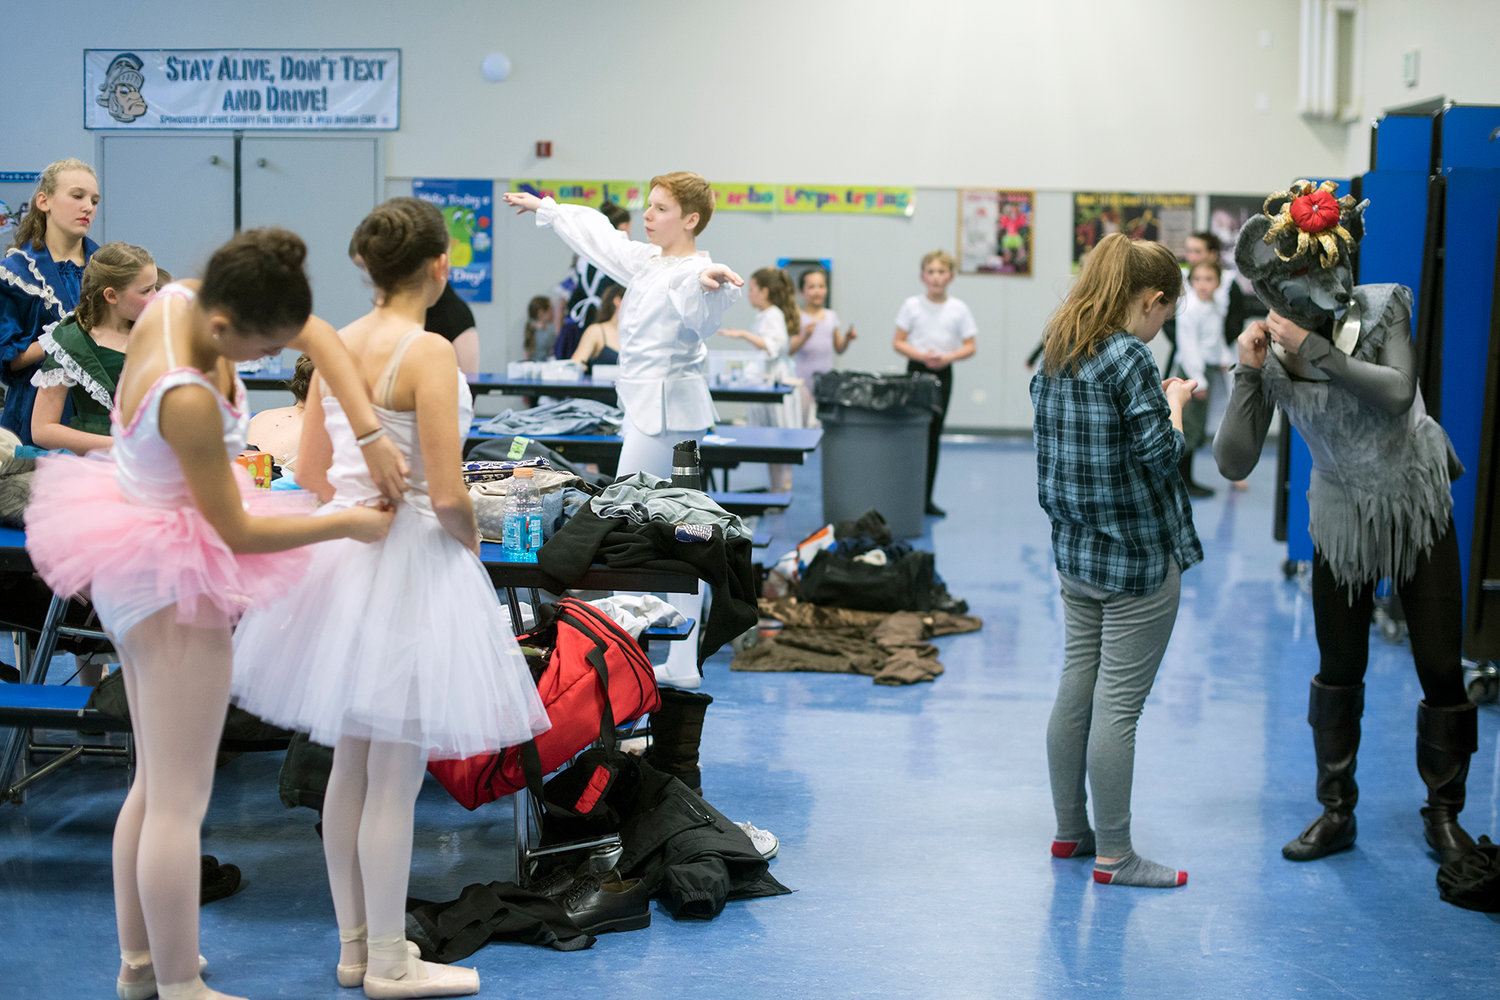 The cast of the Nutcracker prepare their costumes prior to taking the stage for the first of two Saturday performances in Pe Ell.